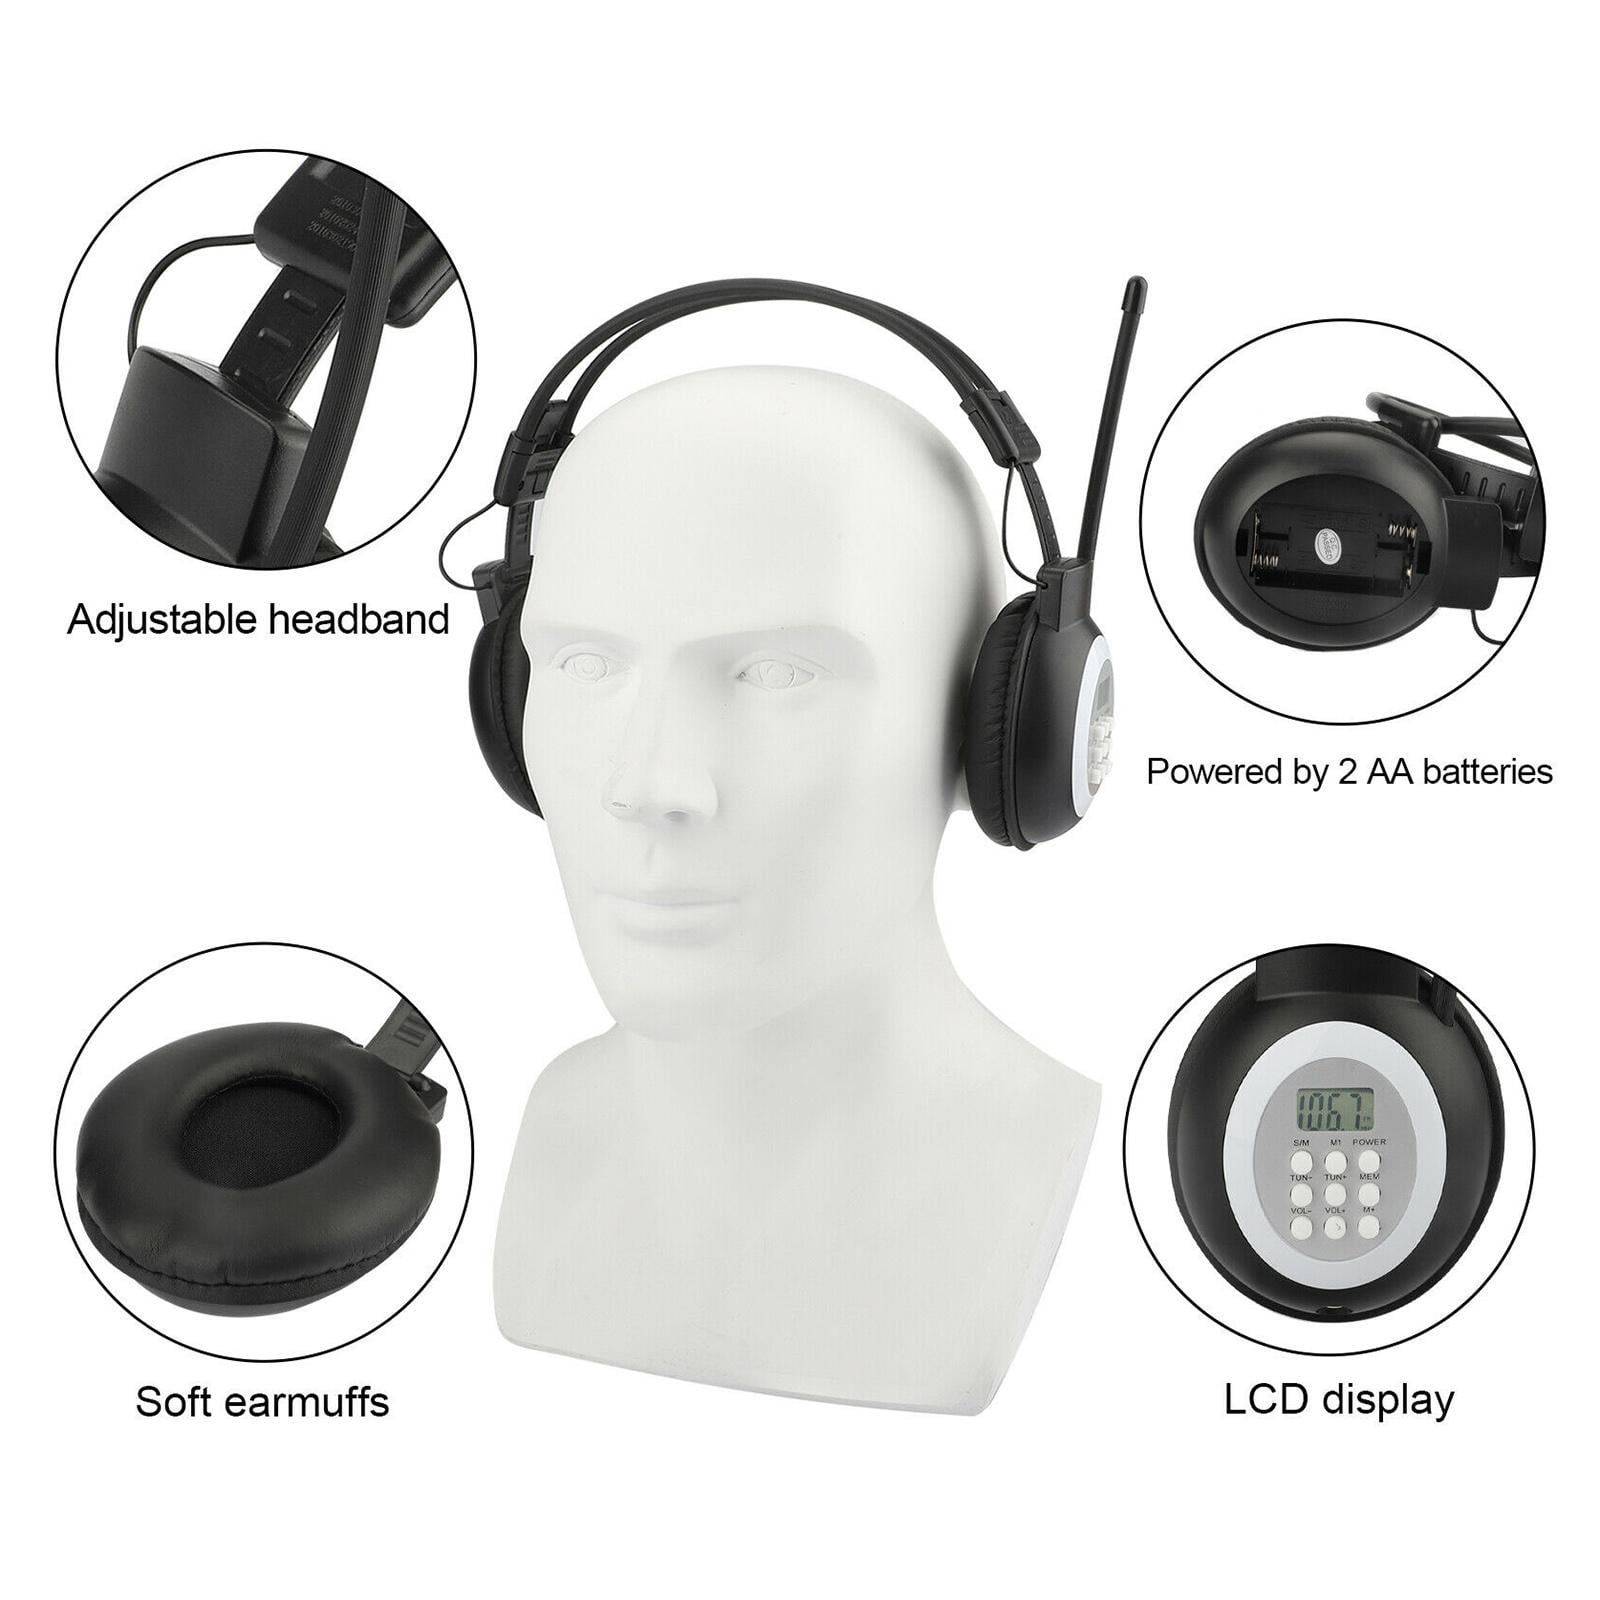 Jogging Outdoor Portable FM Radio Headphones Ear Muffs Battery not Included Battery Operated Personal Wireless Headset FM Radio Receiver for Walking 